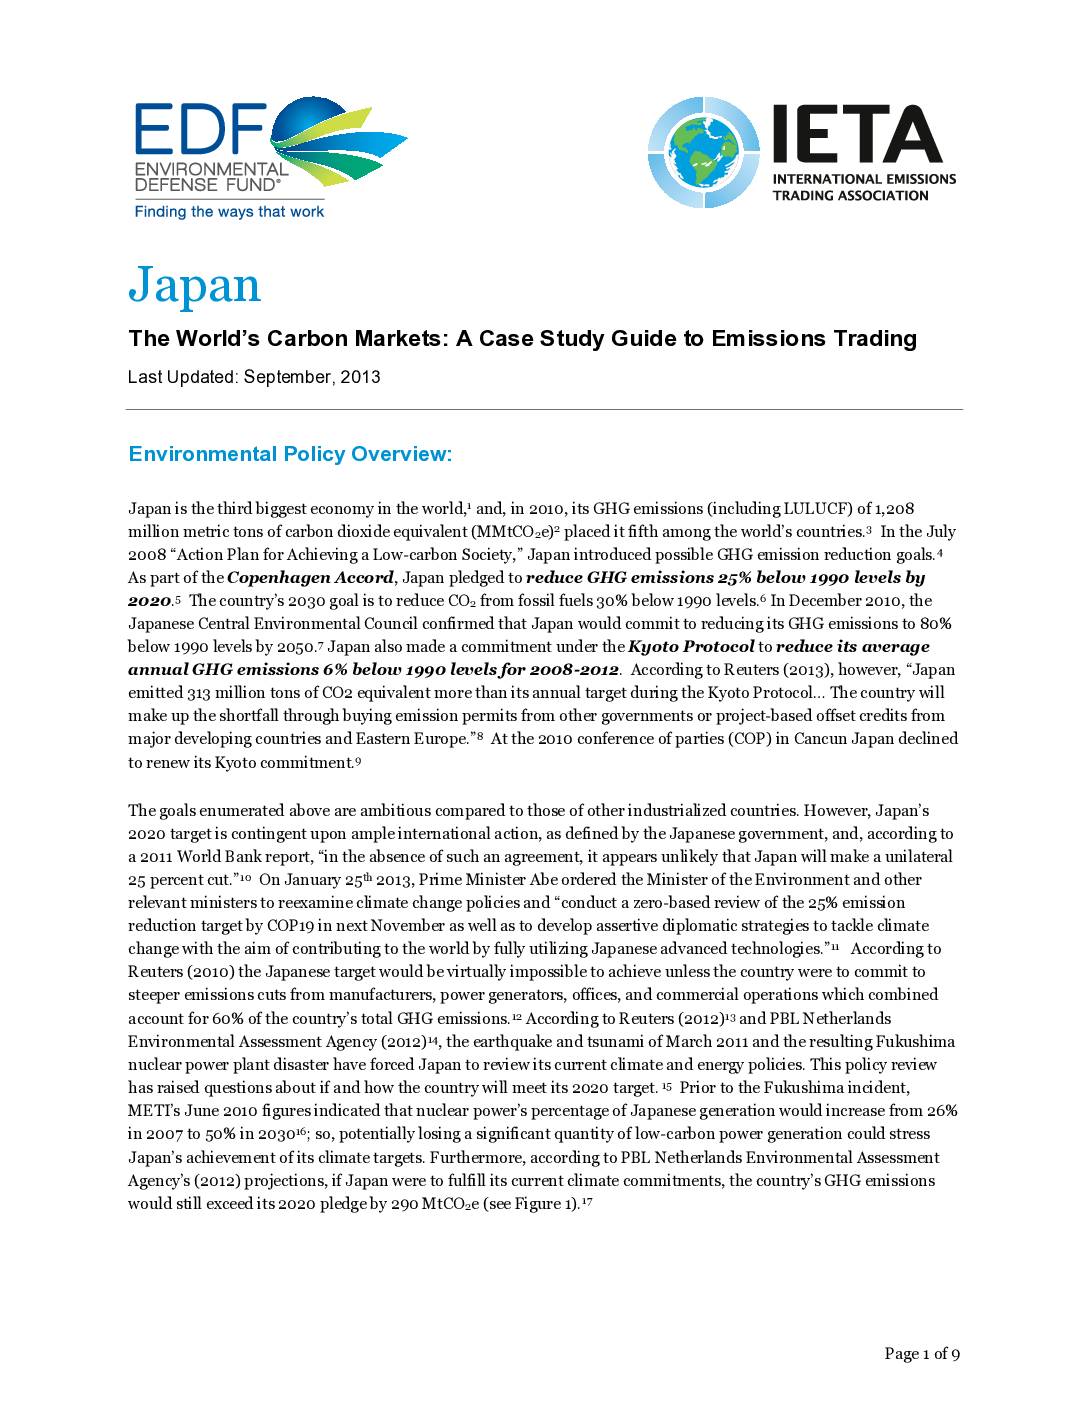 The World’s Carbon Markets: A Case Study Guide to Emissions Trading